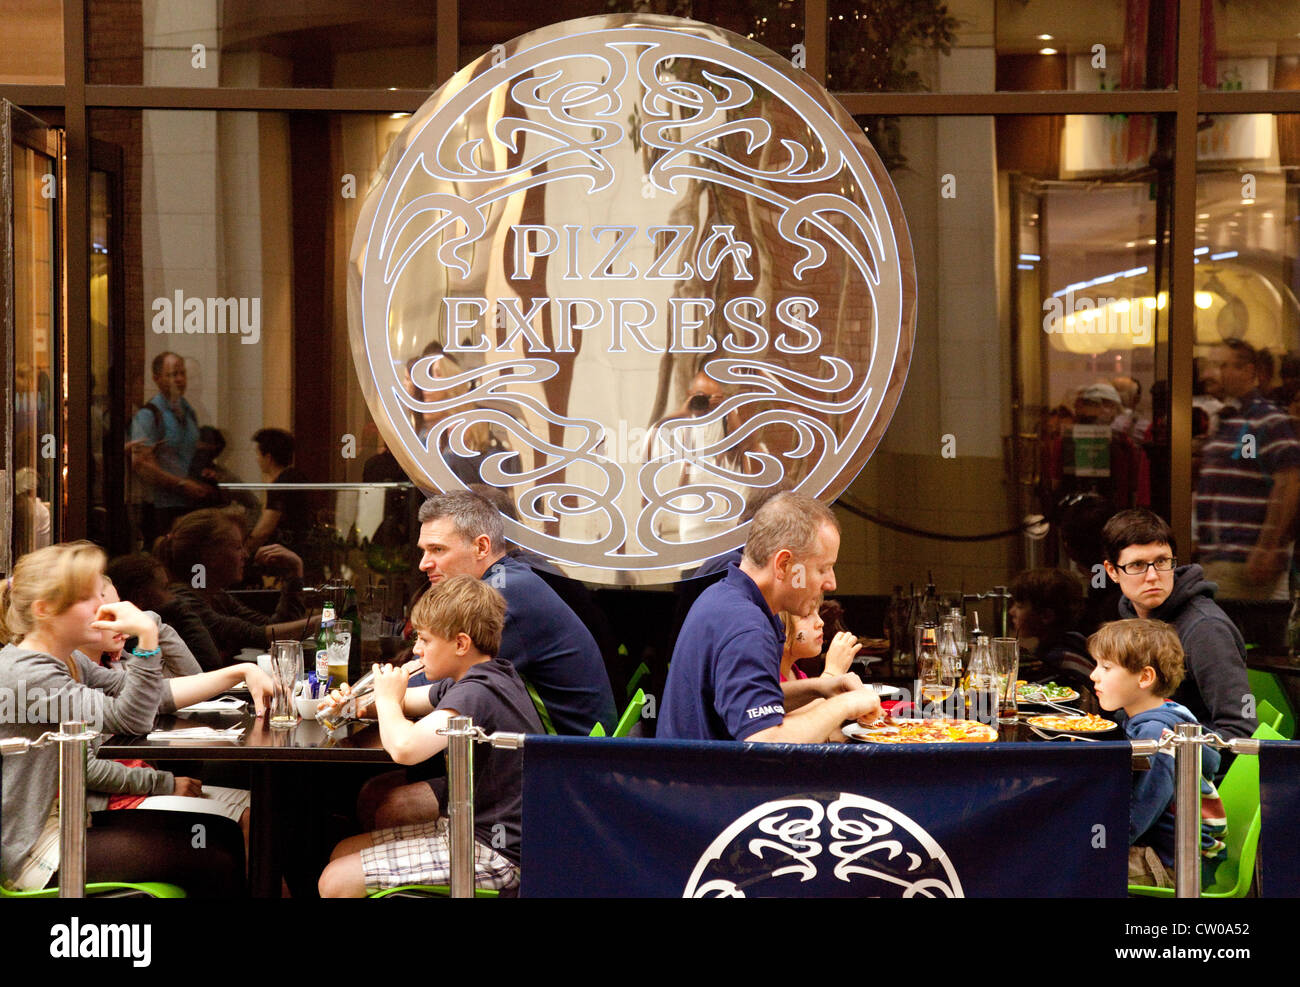 People eating a meal at Pizza express restaurant O2 arena, london UK Stock Photo